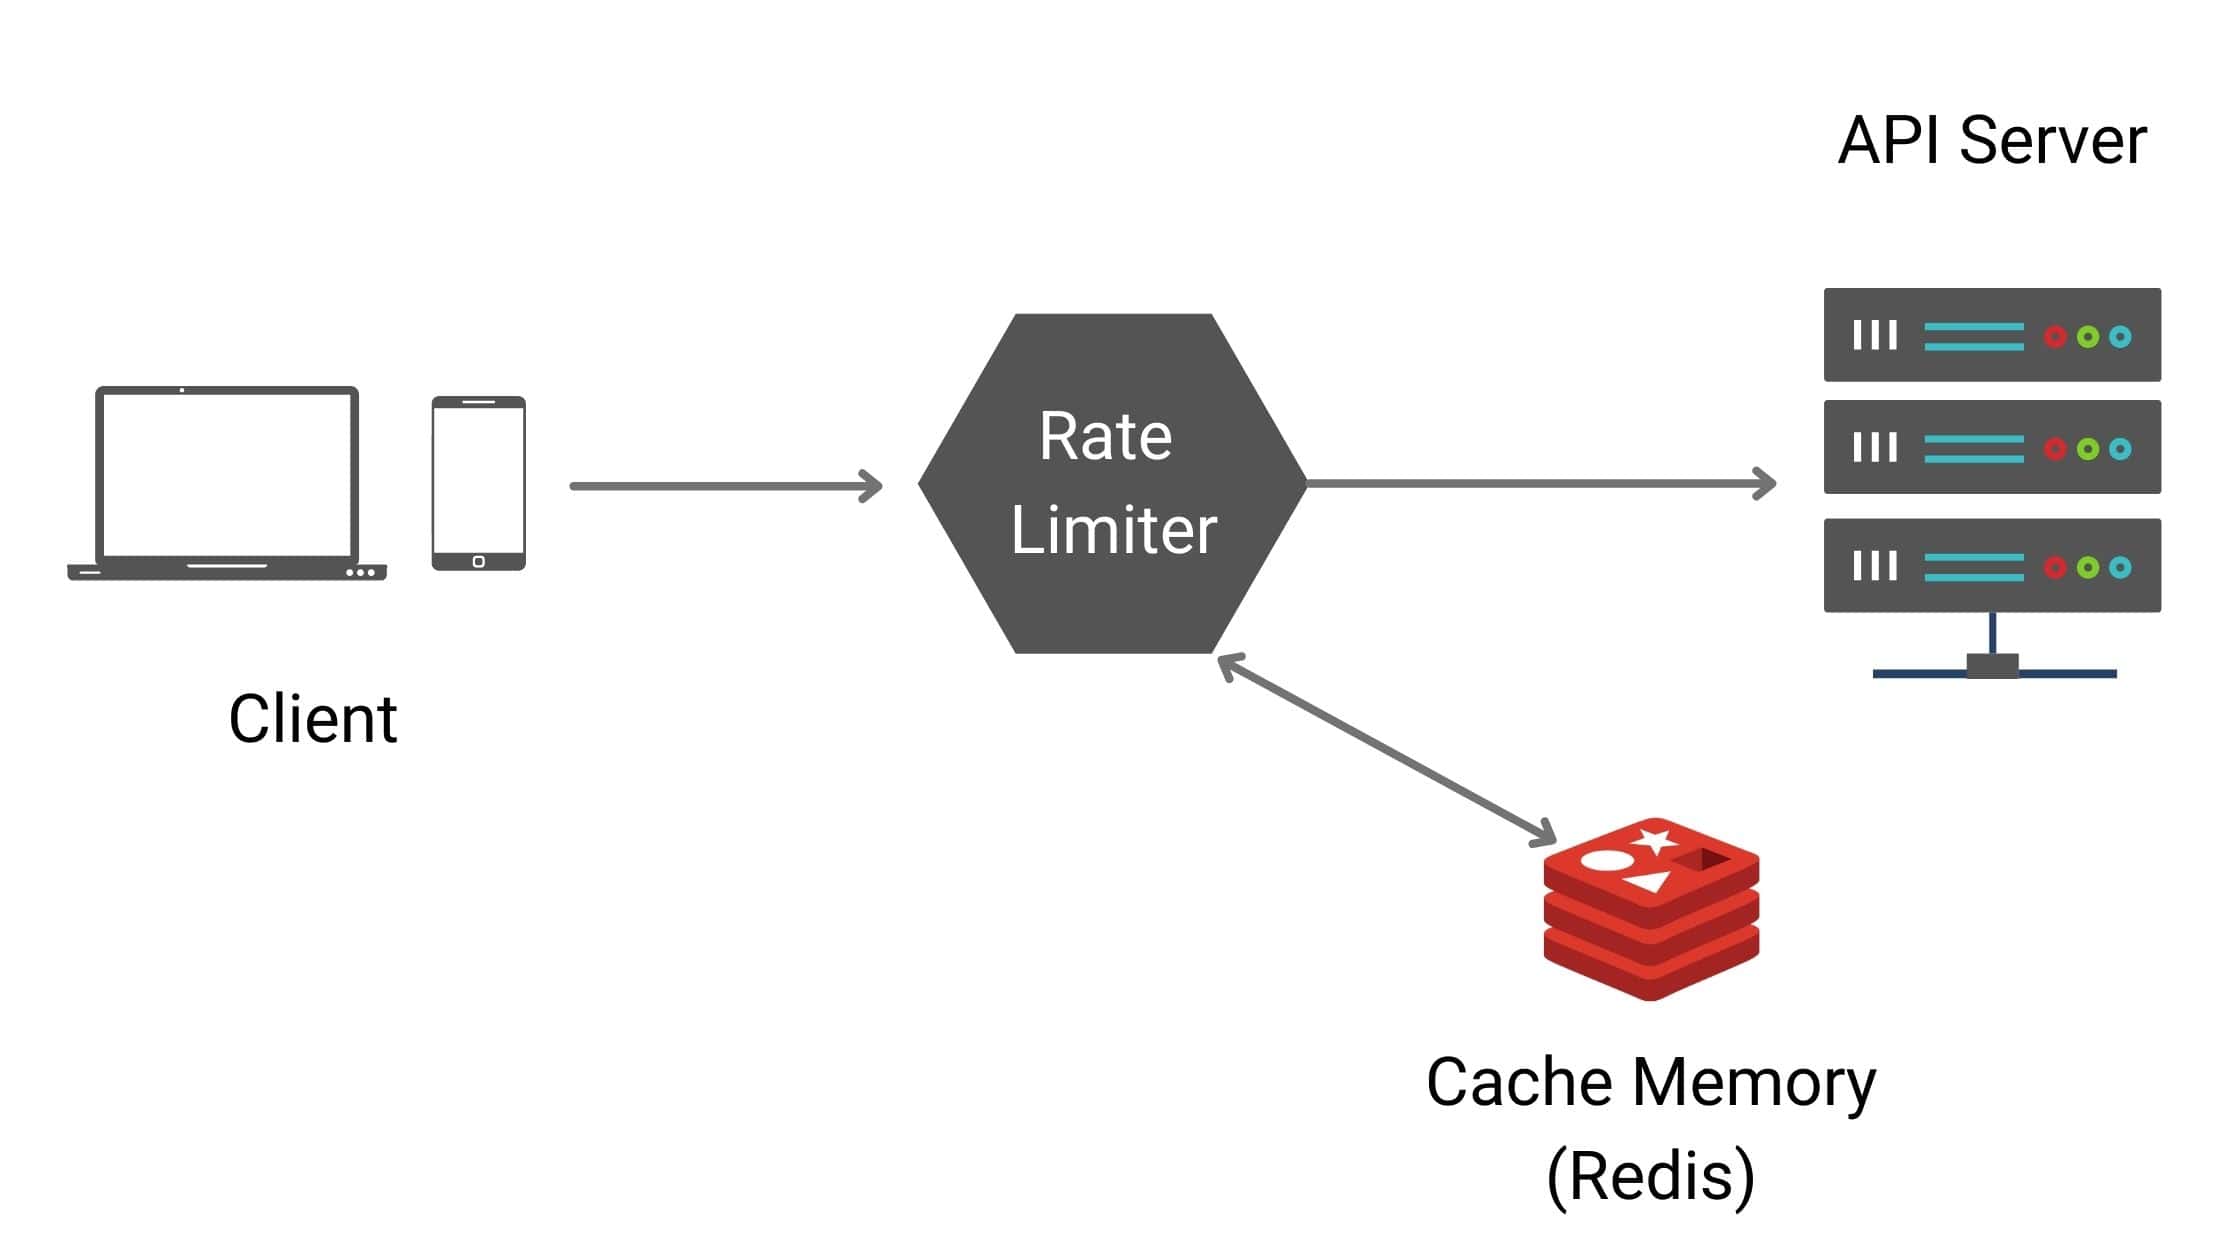 Rate limiter